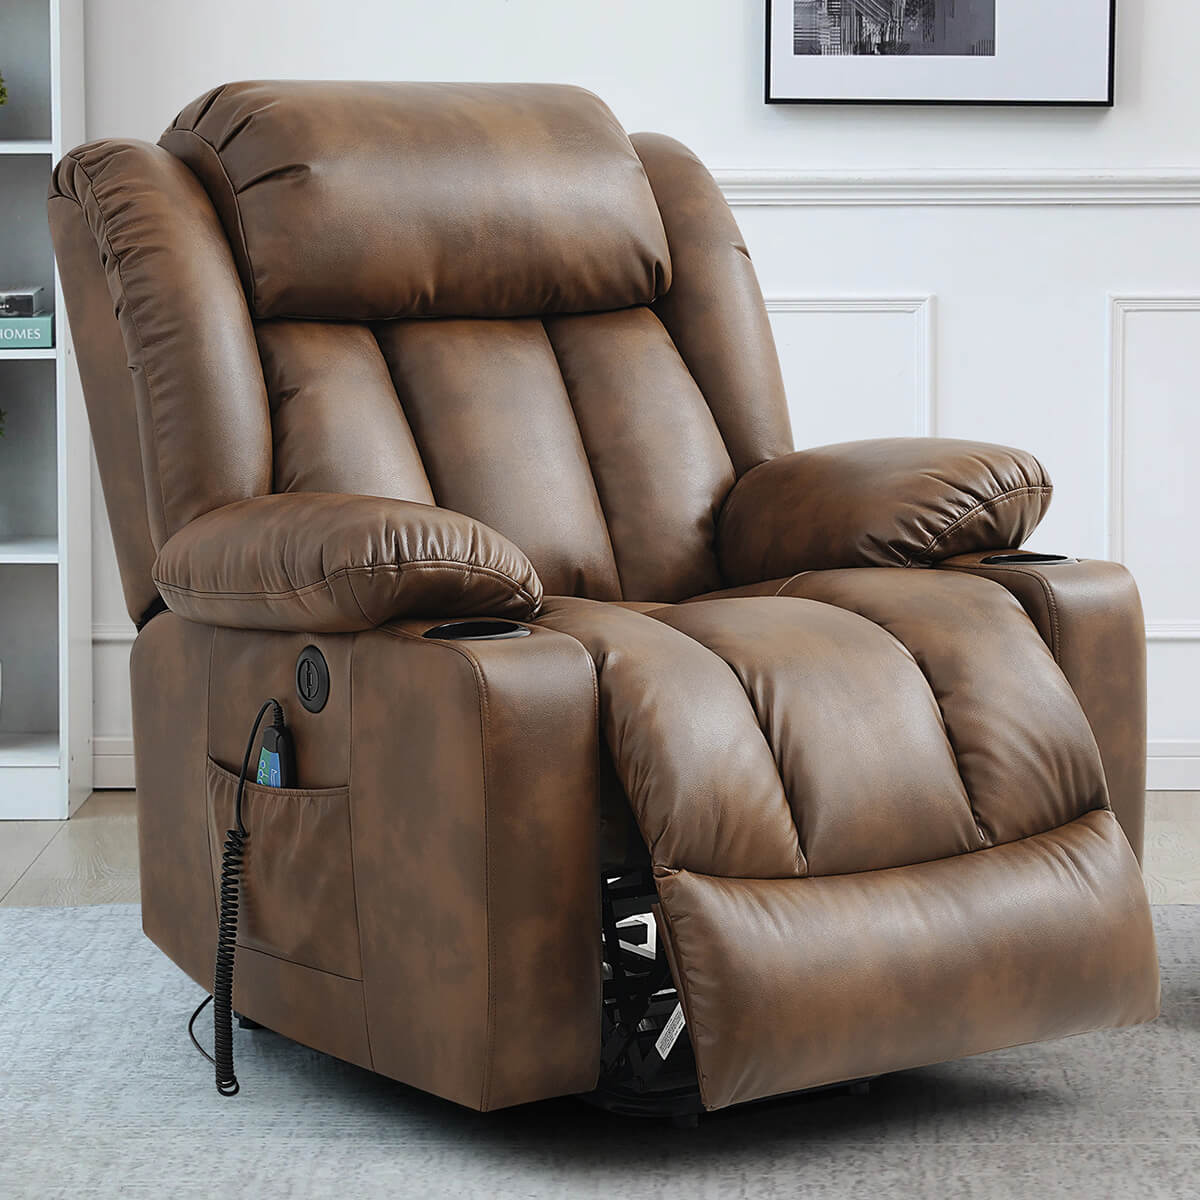 Soulout Luxury Lift Chair Recliner with Heat and Massage Light Brown